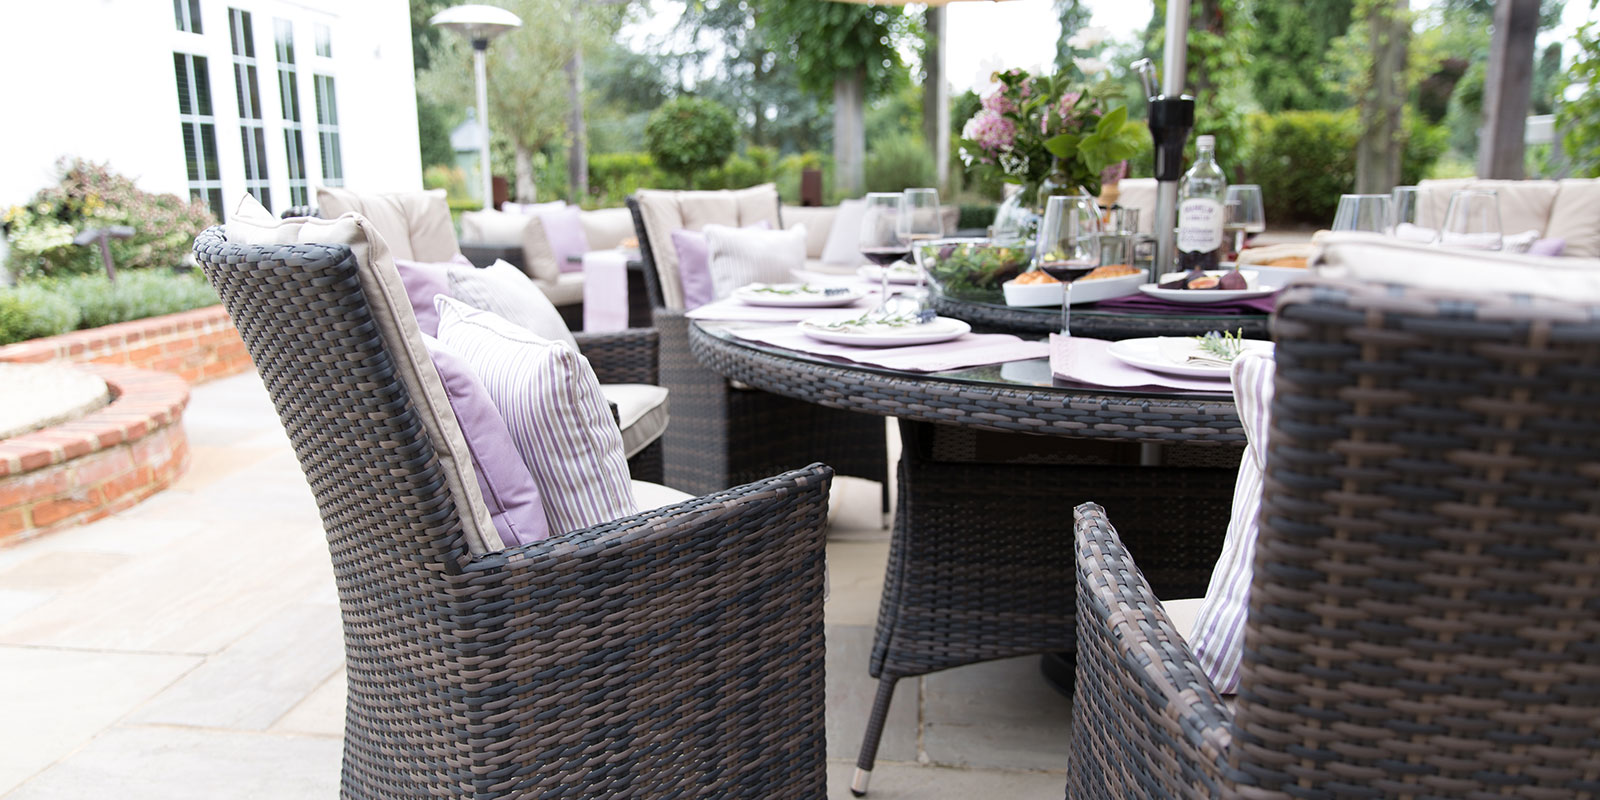 Build Your Own vs. Fully Assembled Rattan Garden Furniture